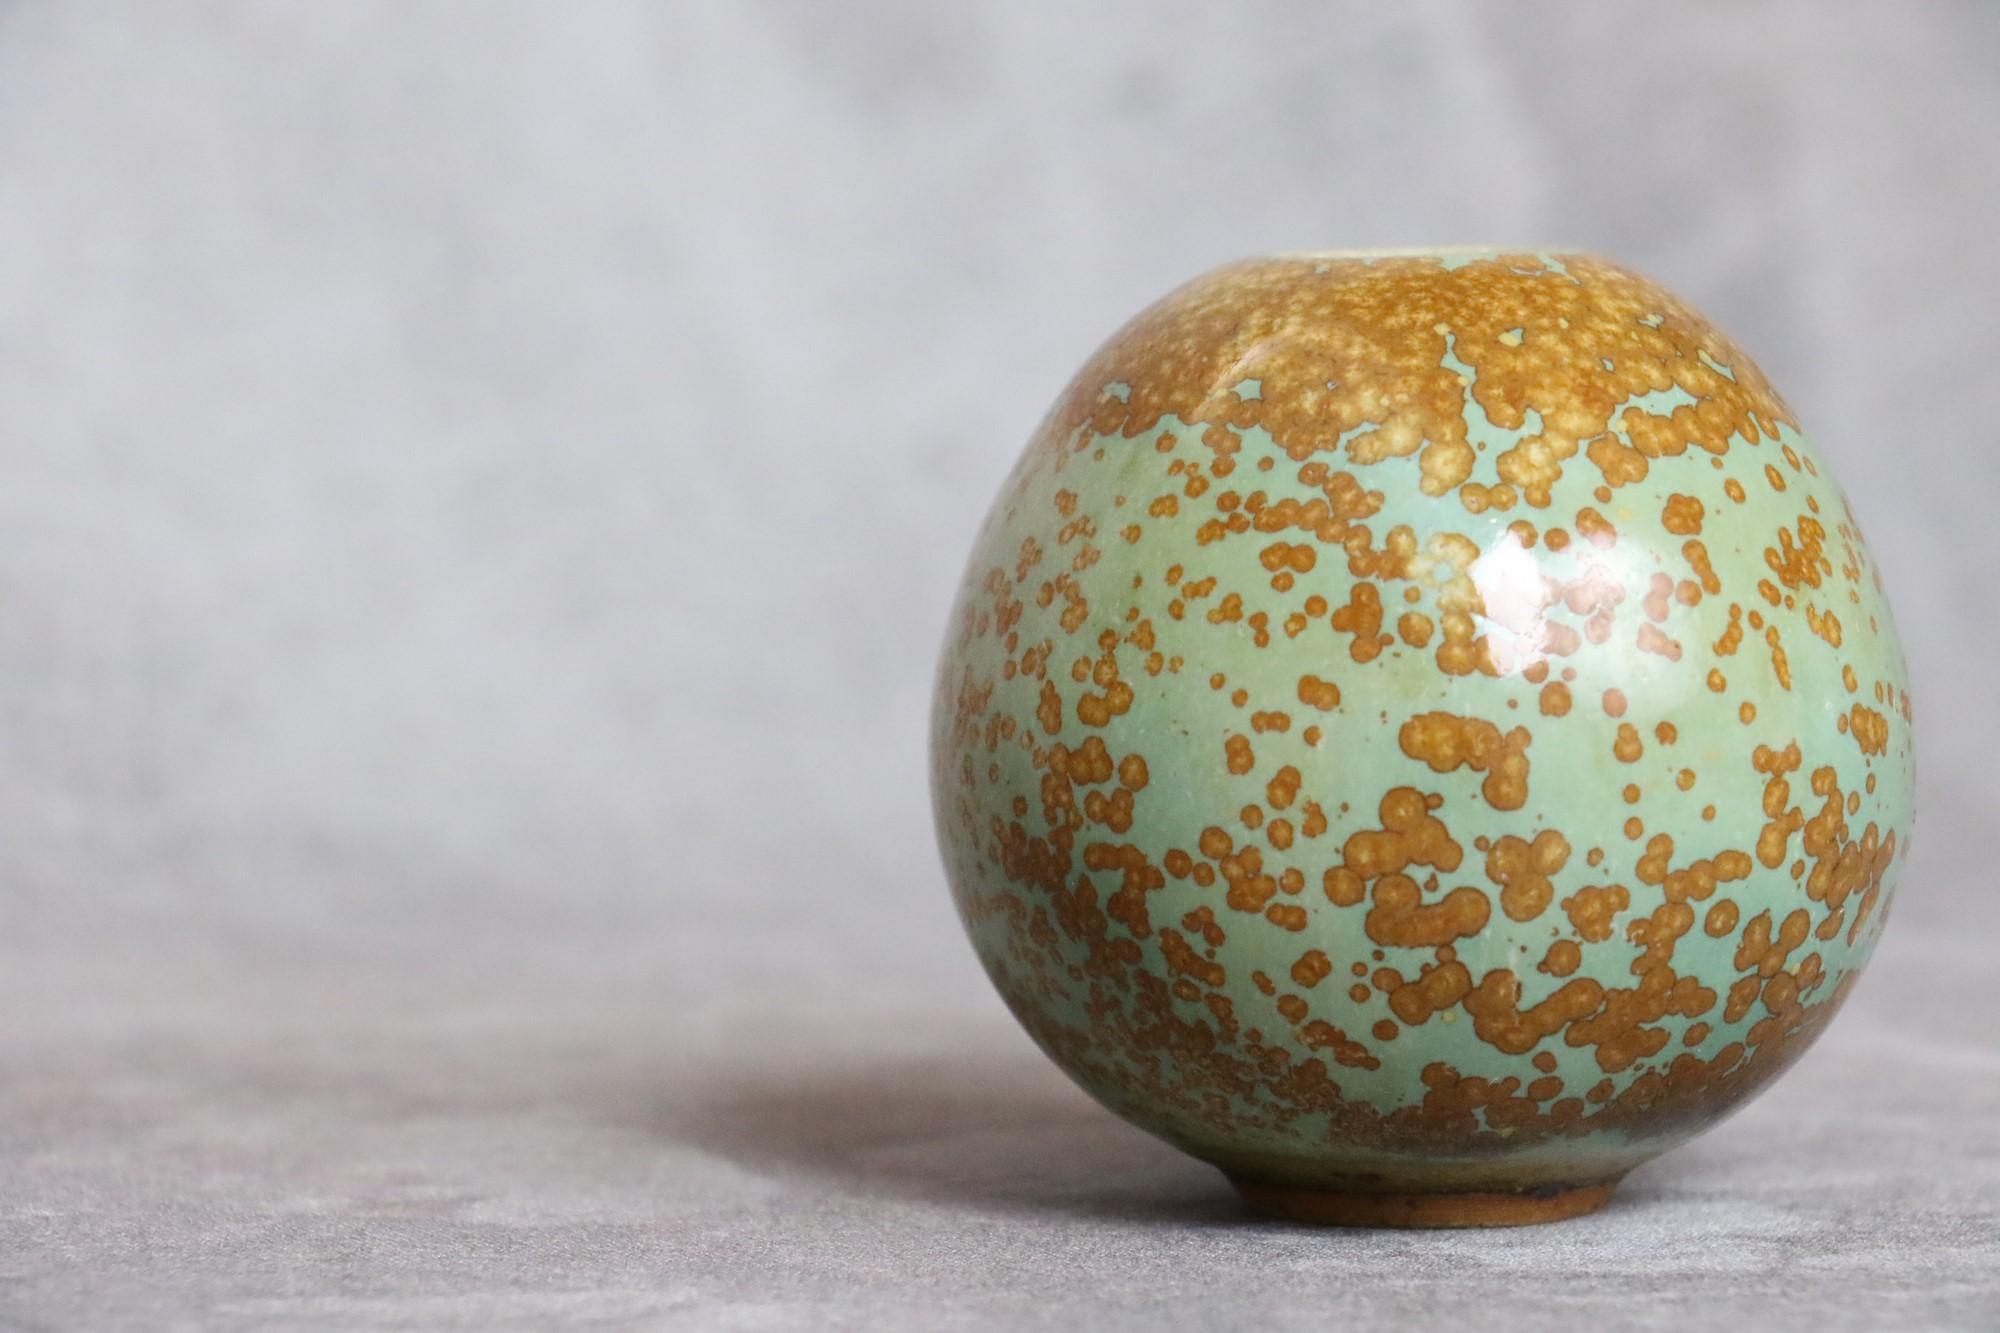 French Ceramic Ball Vase with Nucleations by Monique Cavallini - circa 2000 For Sale 2